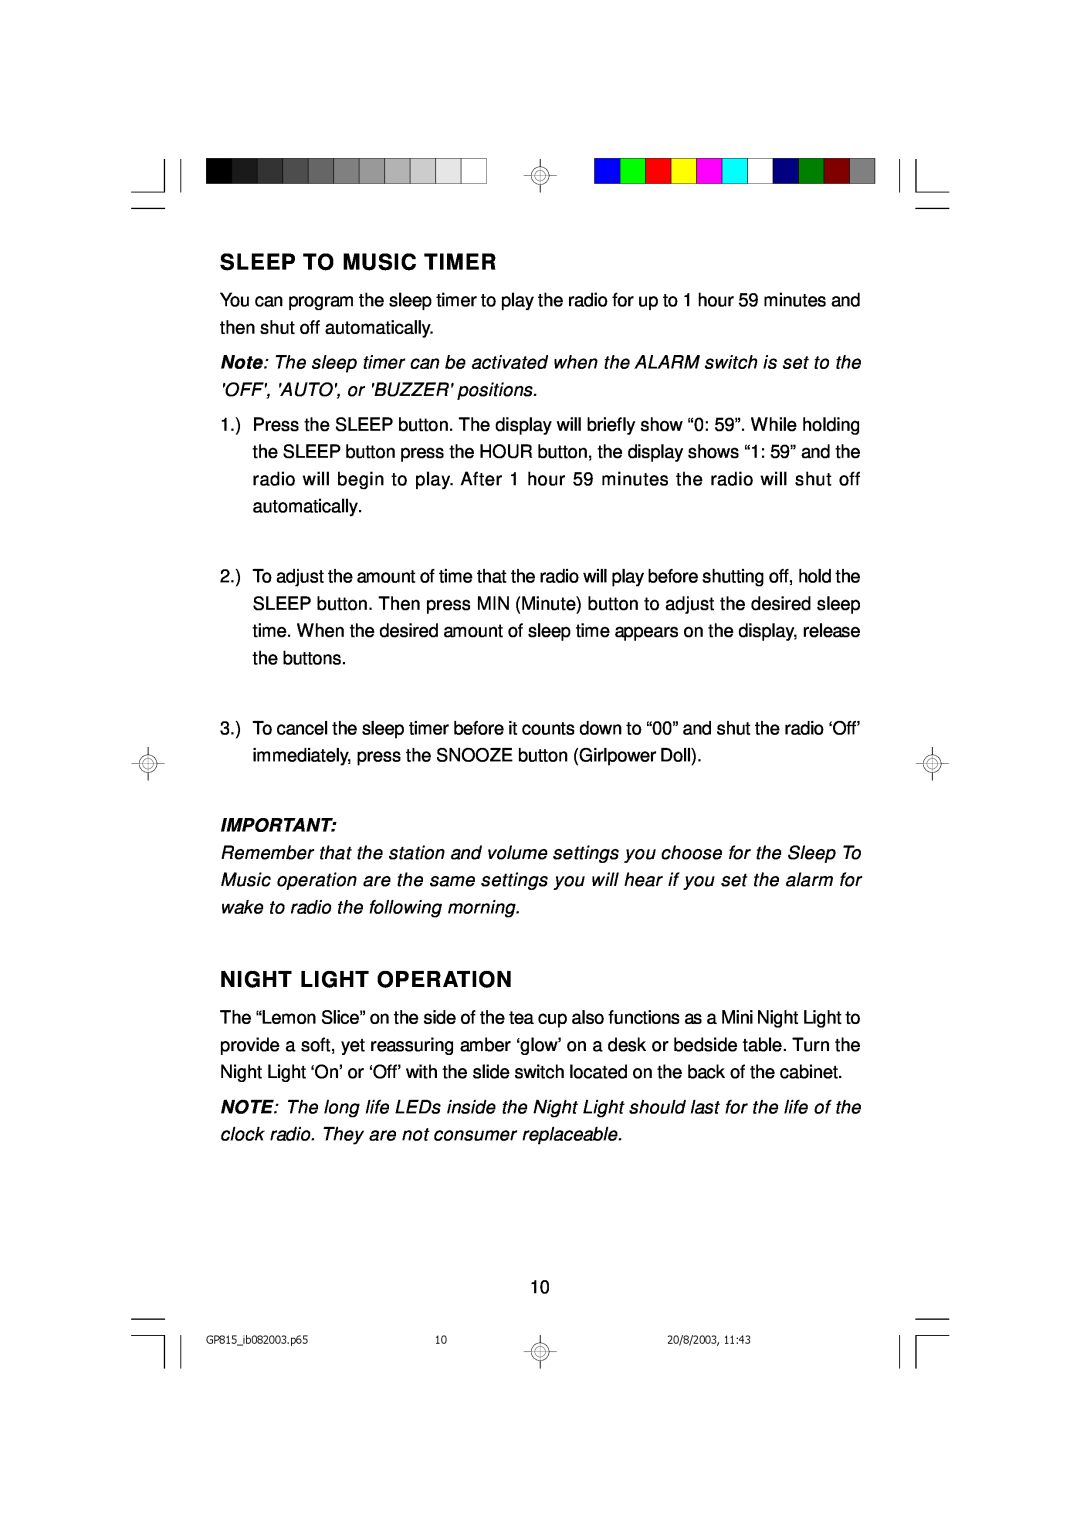 Emerson GP815 owner manual Sleep To Music Timer, Night Light Operation 